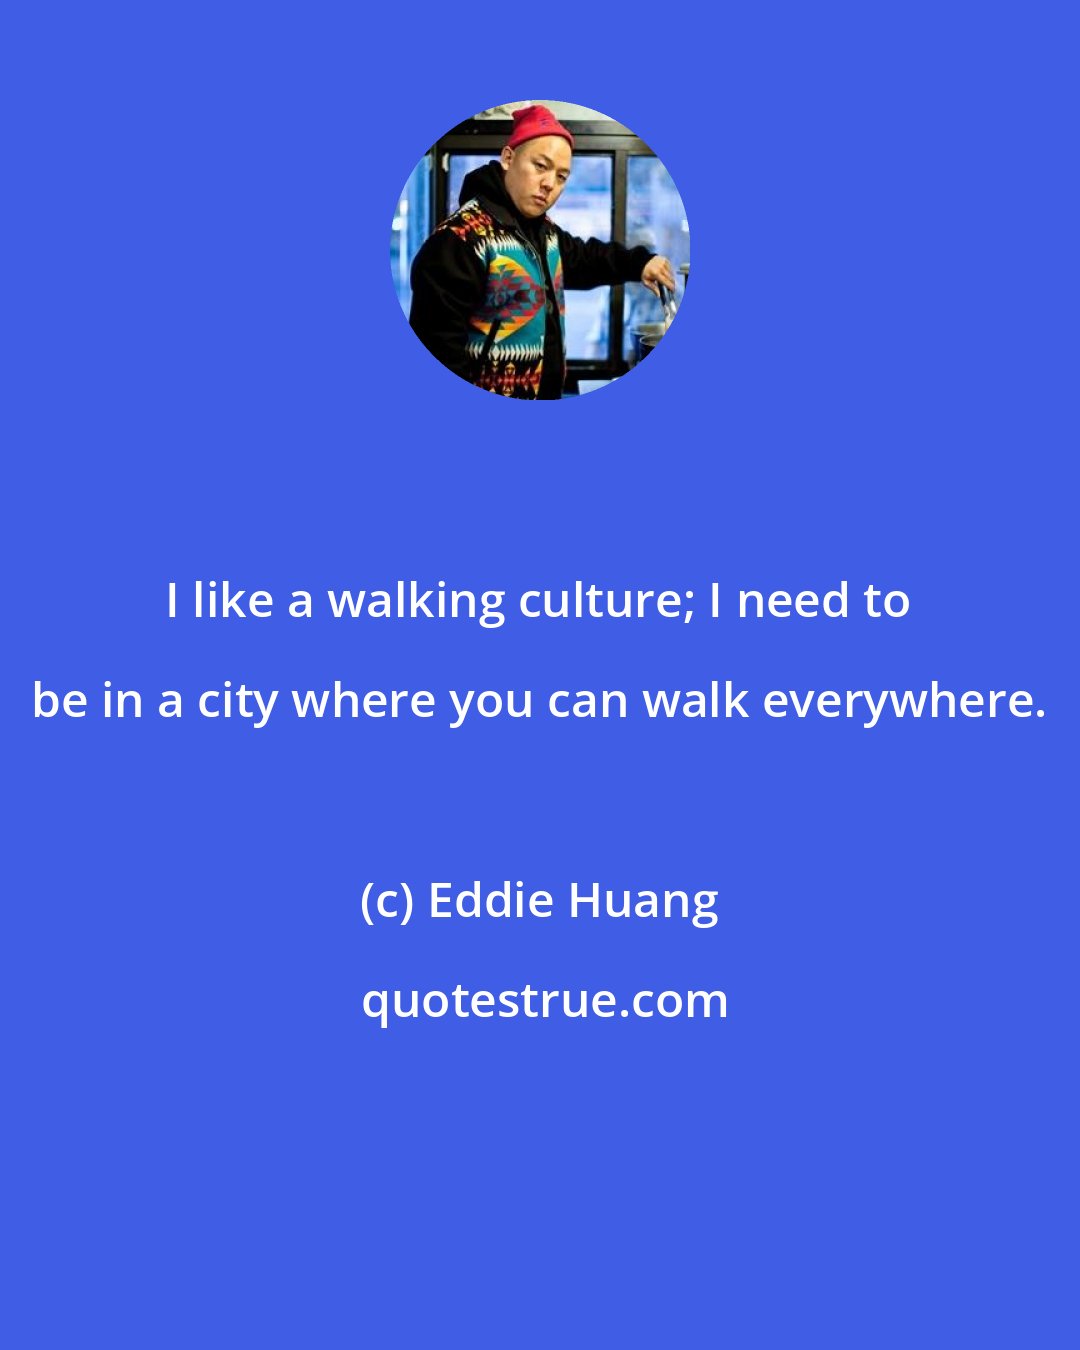 Eddie Huang: I like a walking culture; I need to be in a city where you can walk everywhere.